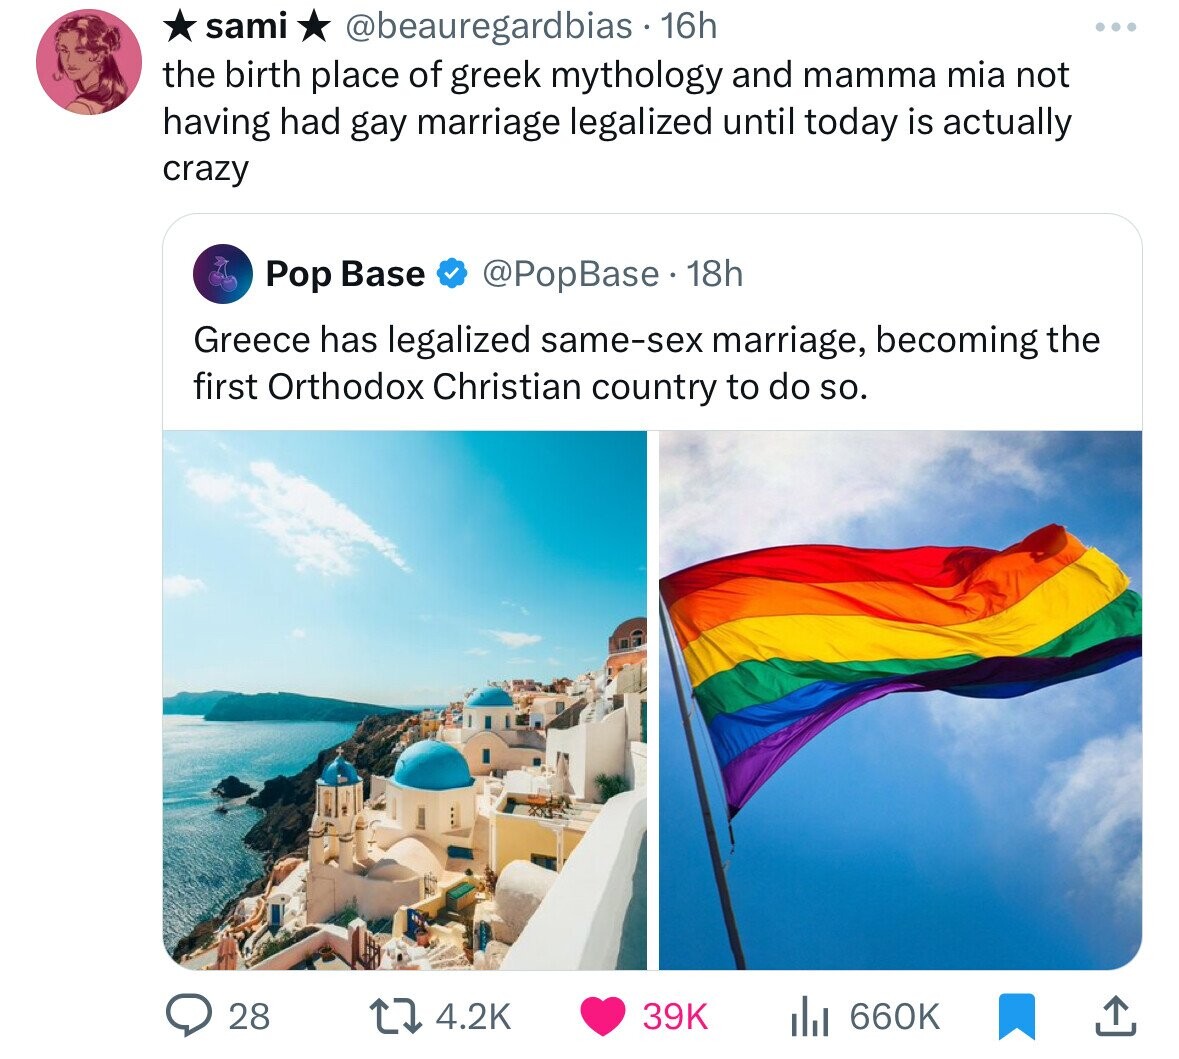 water resources - sami bias 16h the birth place of greek mythology and mamma mia not having had gay marriage legalized until today is actually crazy Pop Base 18h Greece has legalized samesex marriage, becoming the first Orthodox Christian country to do so